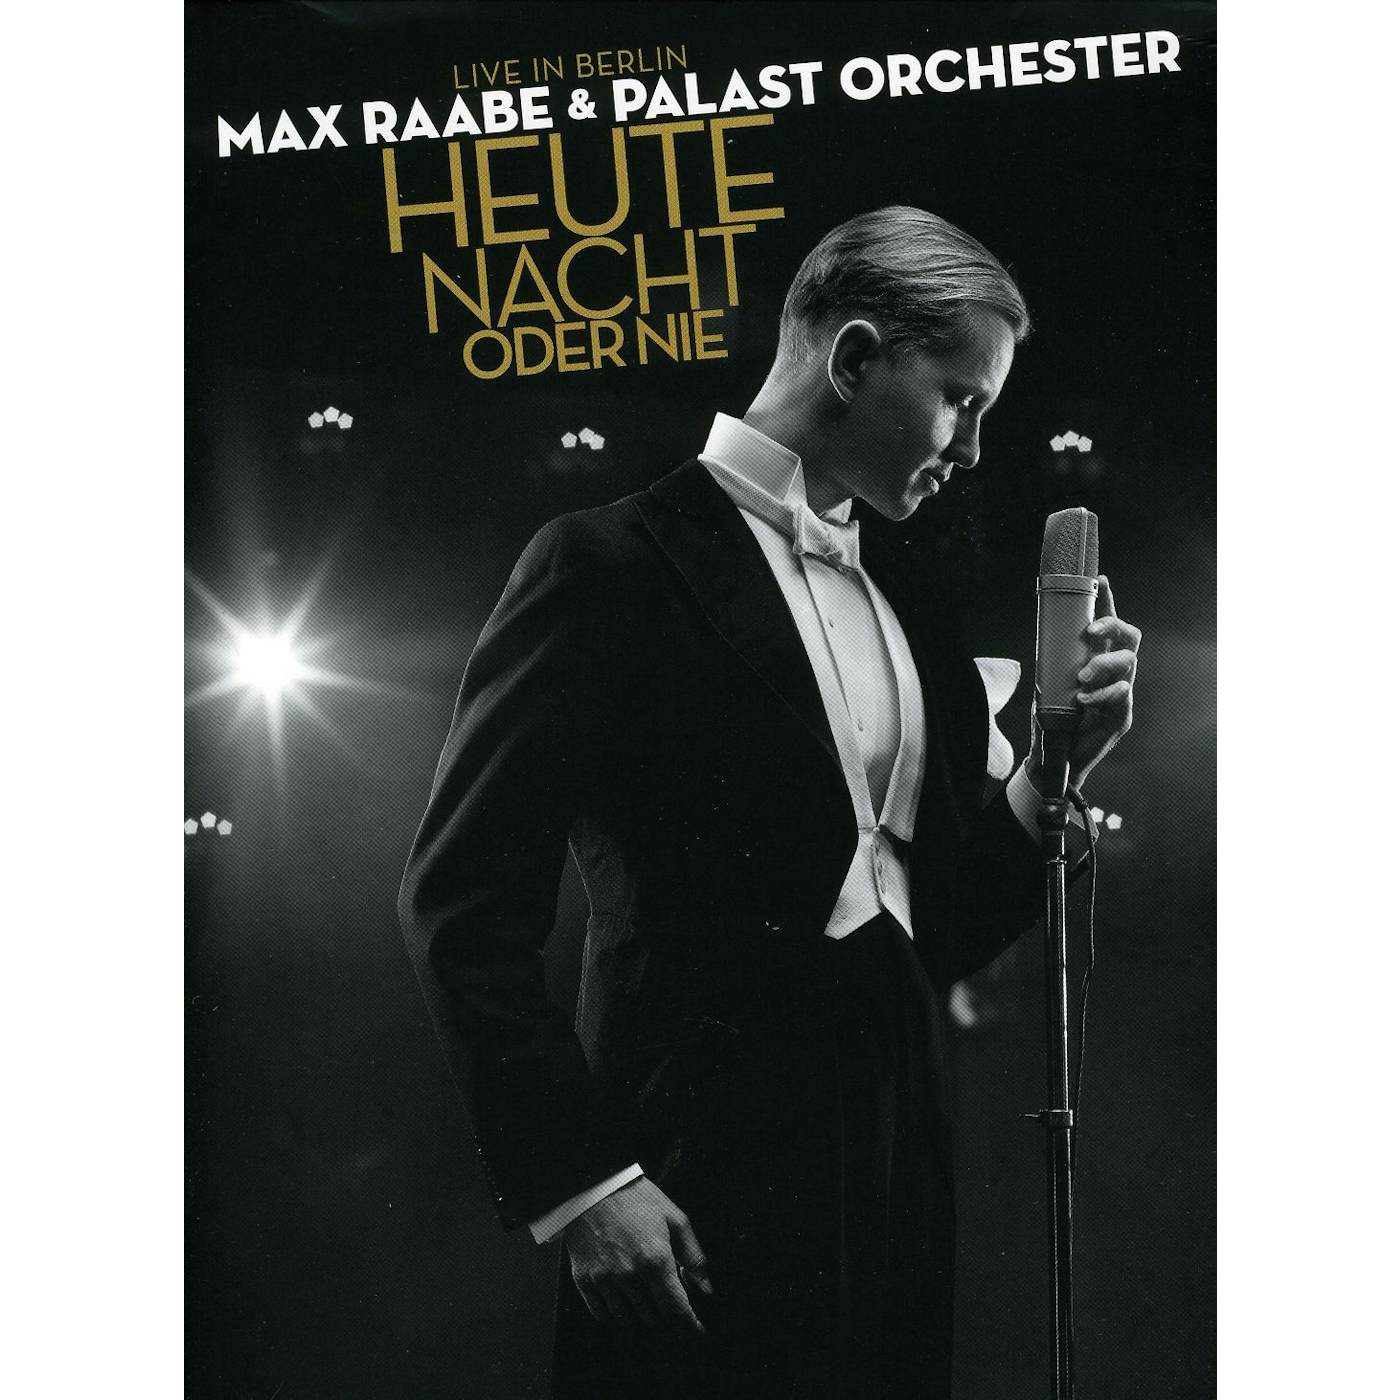 Max Raabe & Palast Orchester HEUTE NACHT ODER NIE: LIVE IN BERLIN DVD